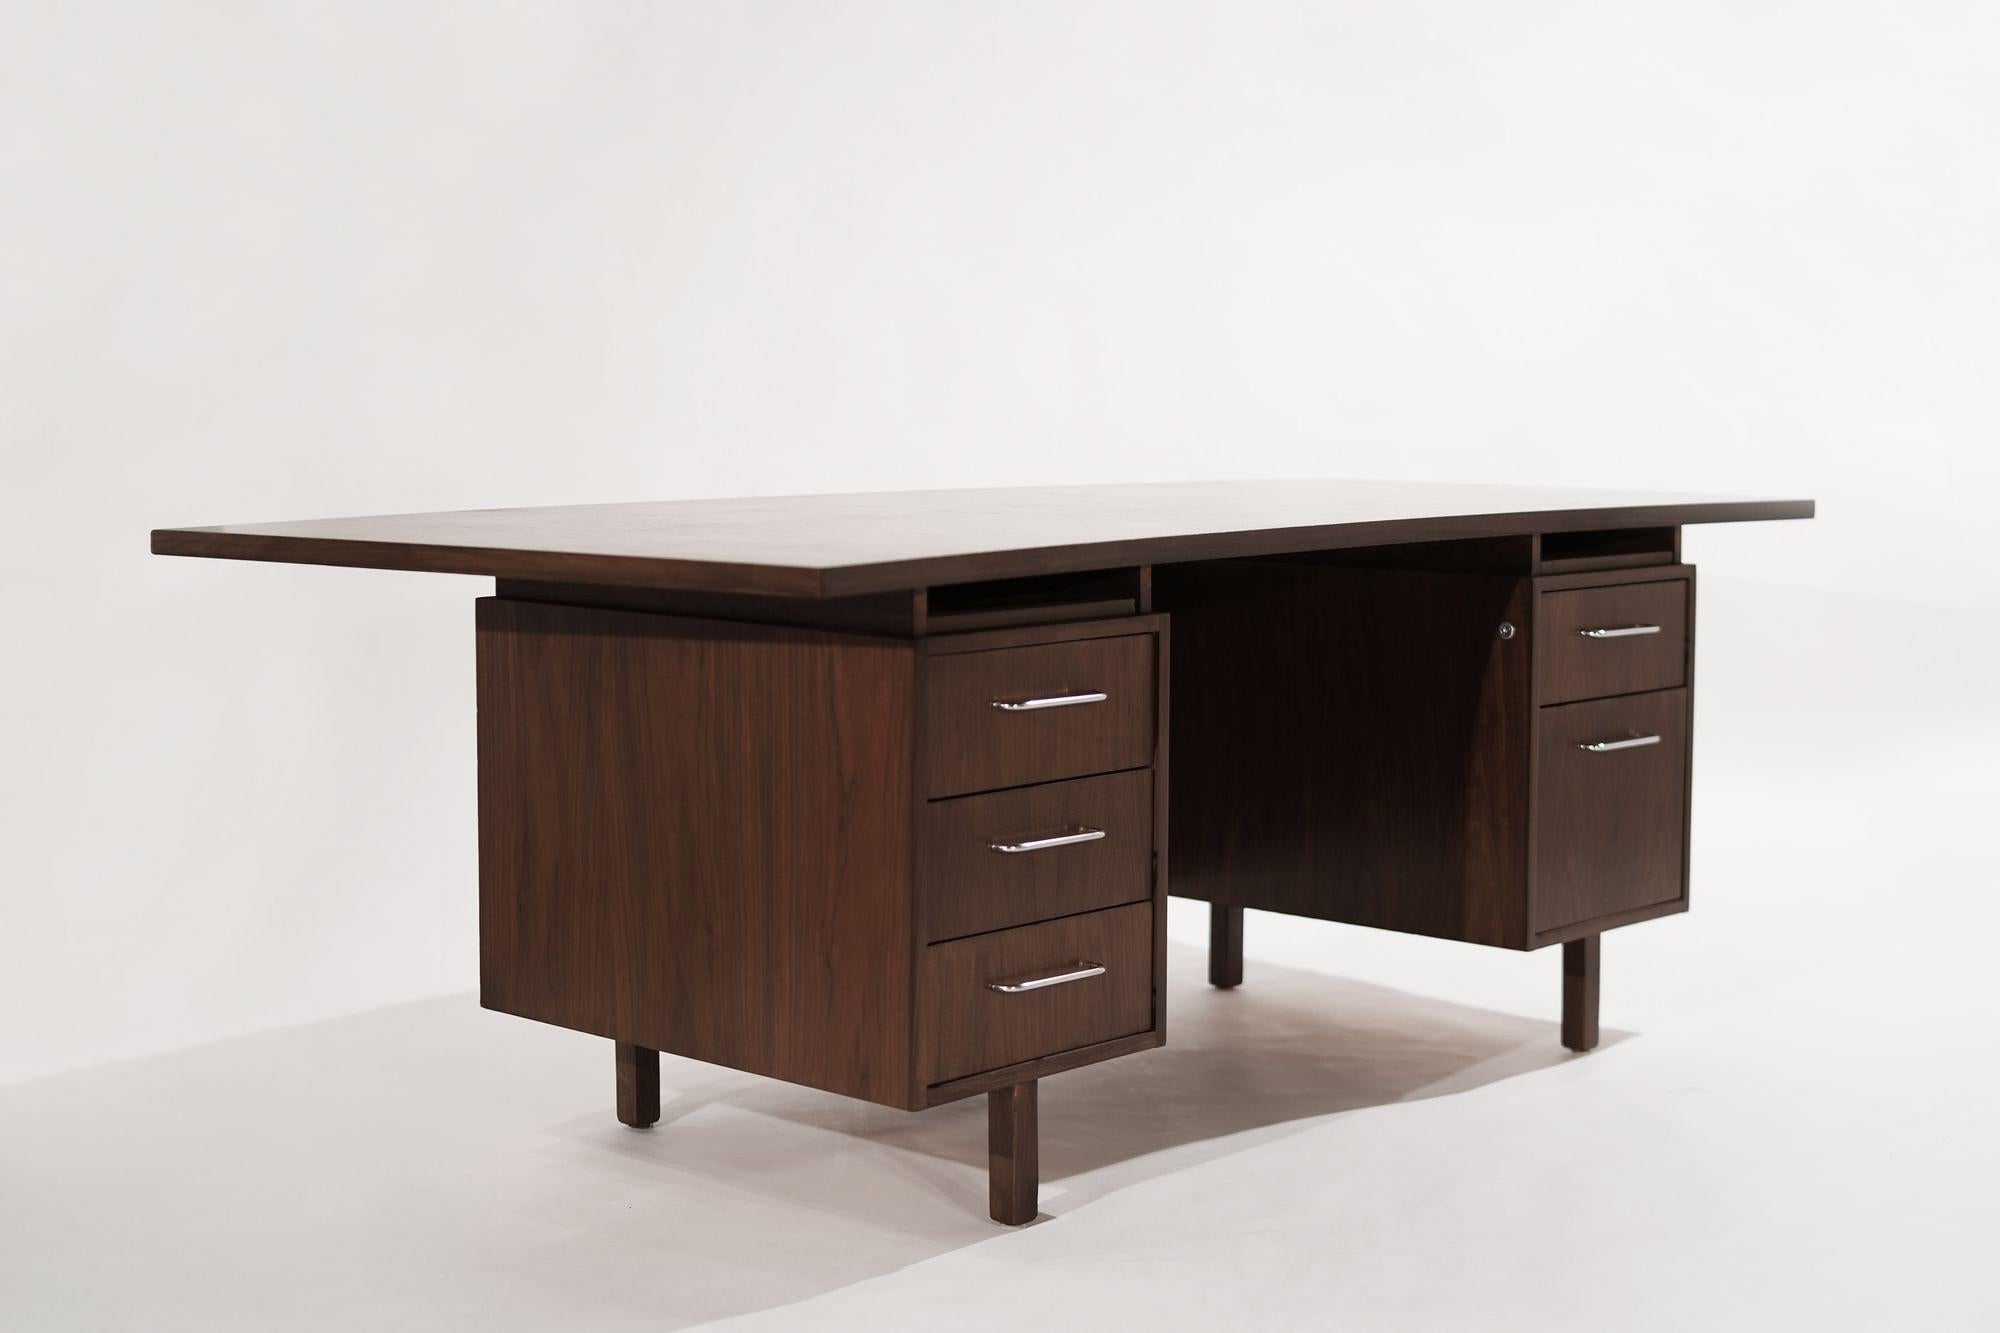 A large-scale desk executed in walnut, designed by Harvey Probber, circa 1950-1959. Completely restored to its original finish and functionality, featuring a con-cave top and nickel hardware. Coated with our special scratch and water-resistant